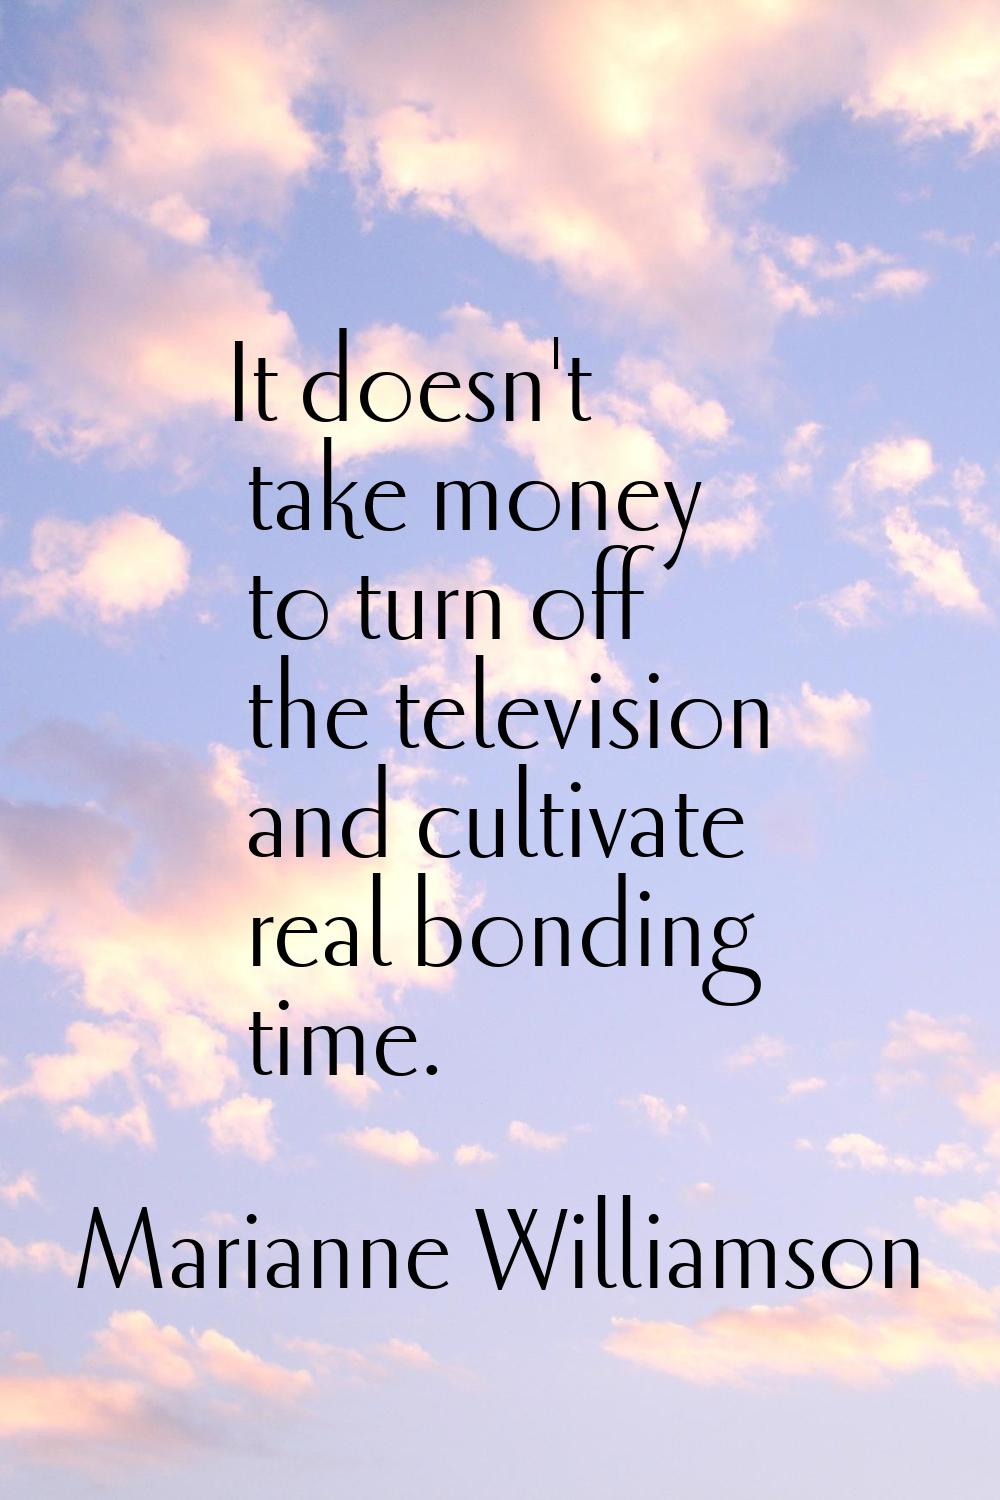 It doesn't take money to turn off the television and cultivate real bonding time.